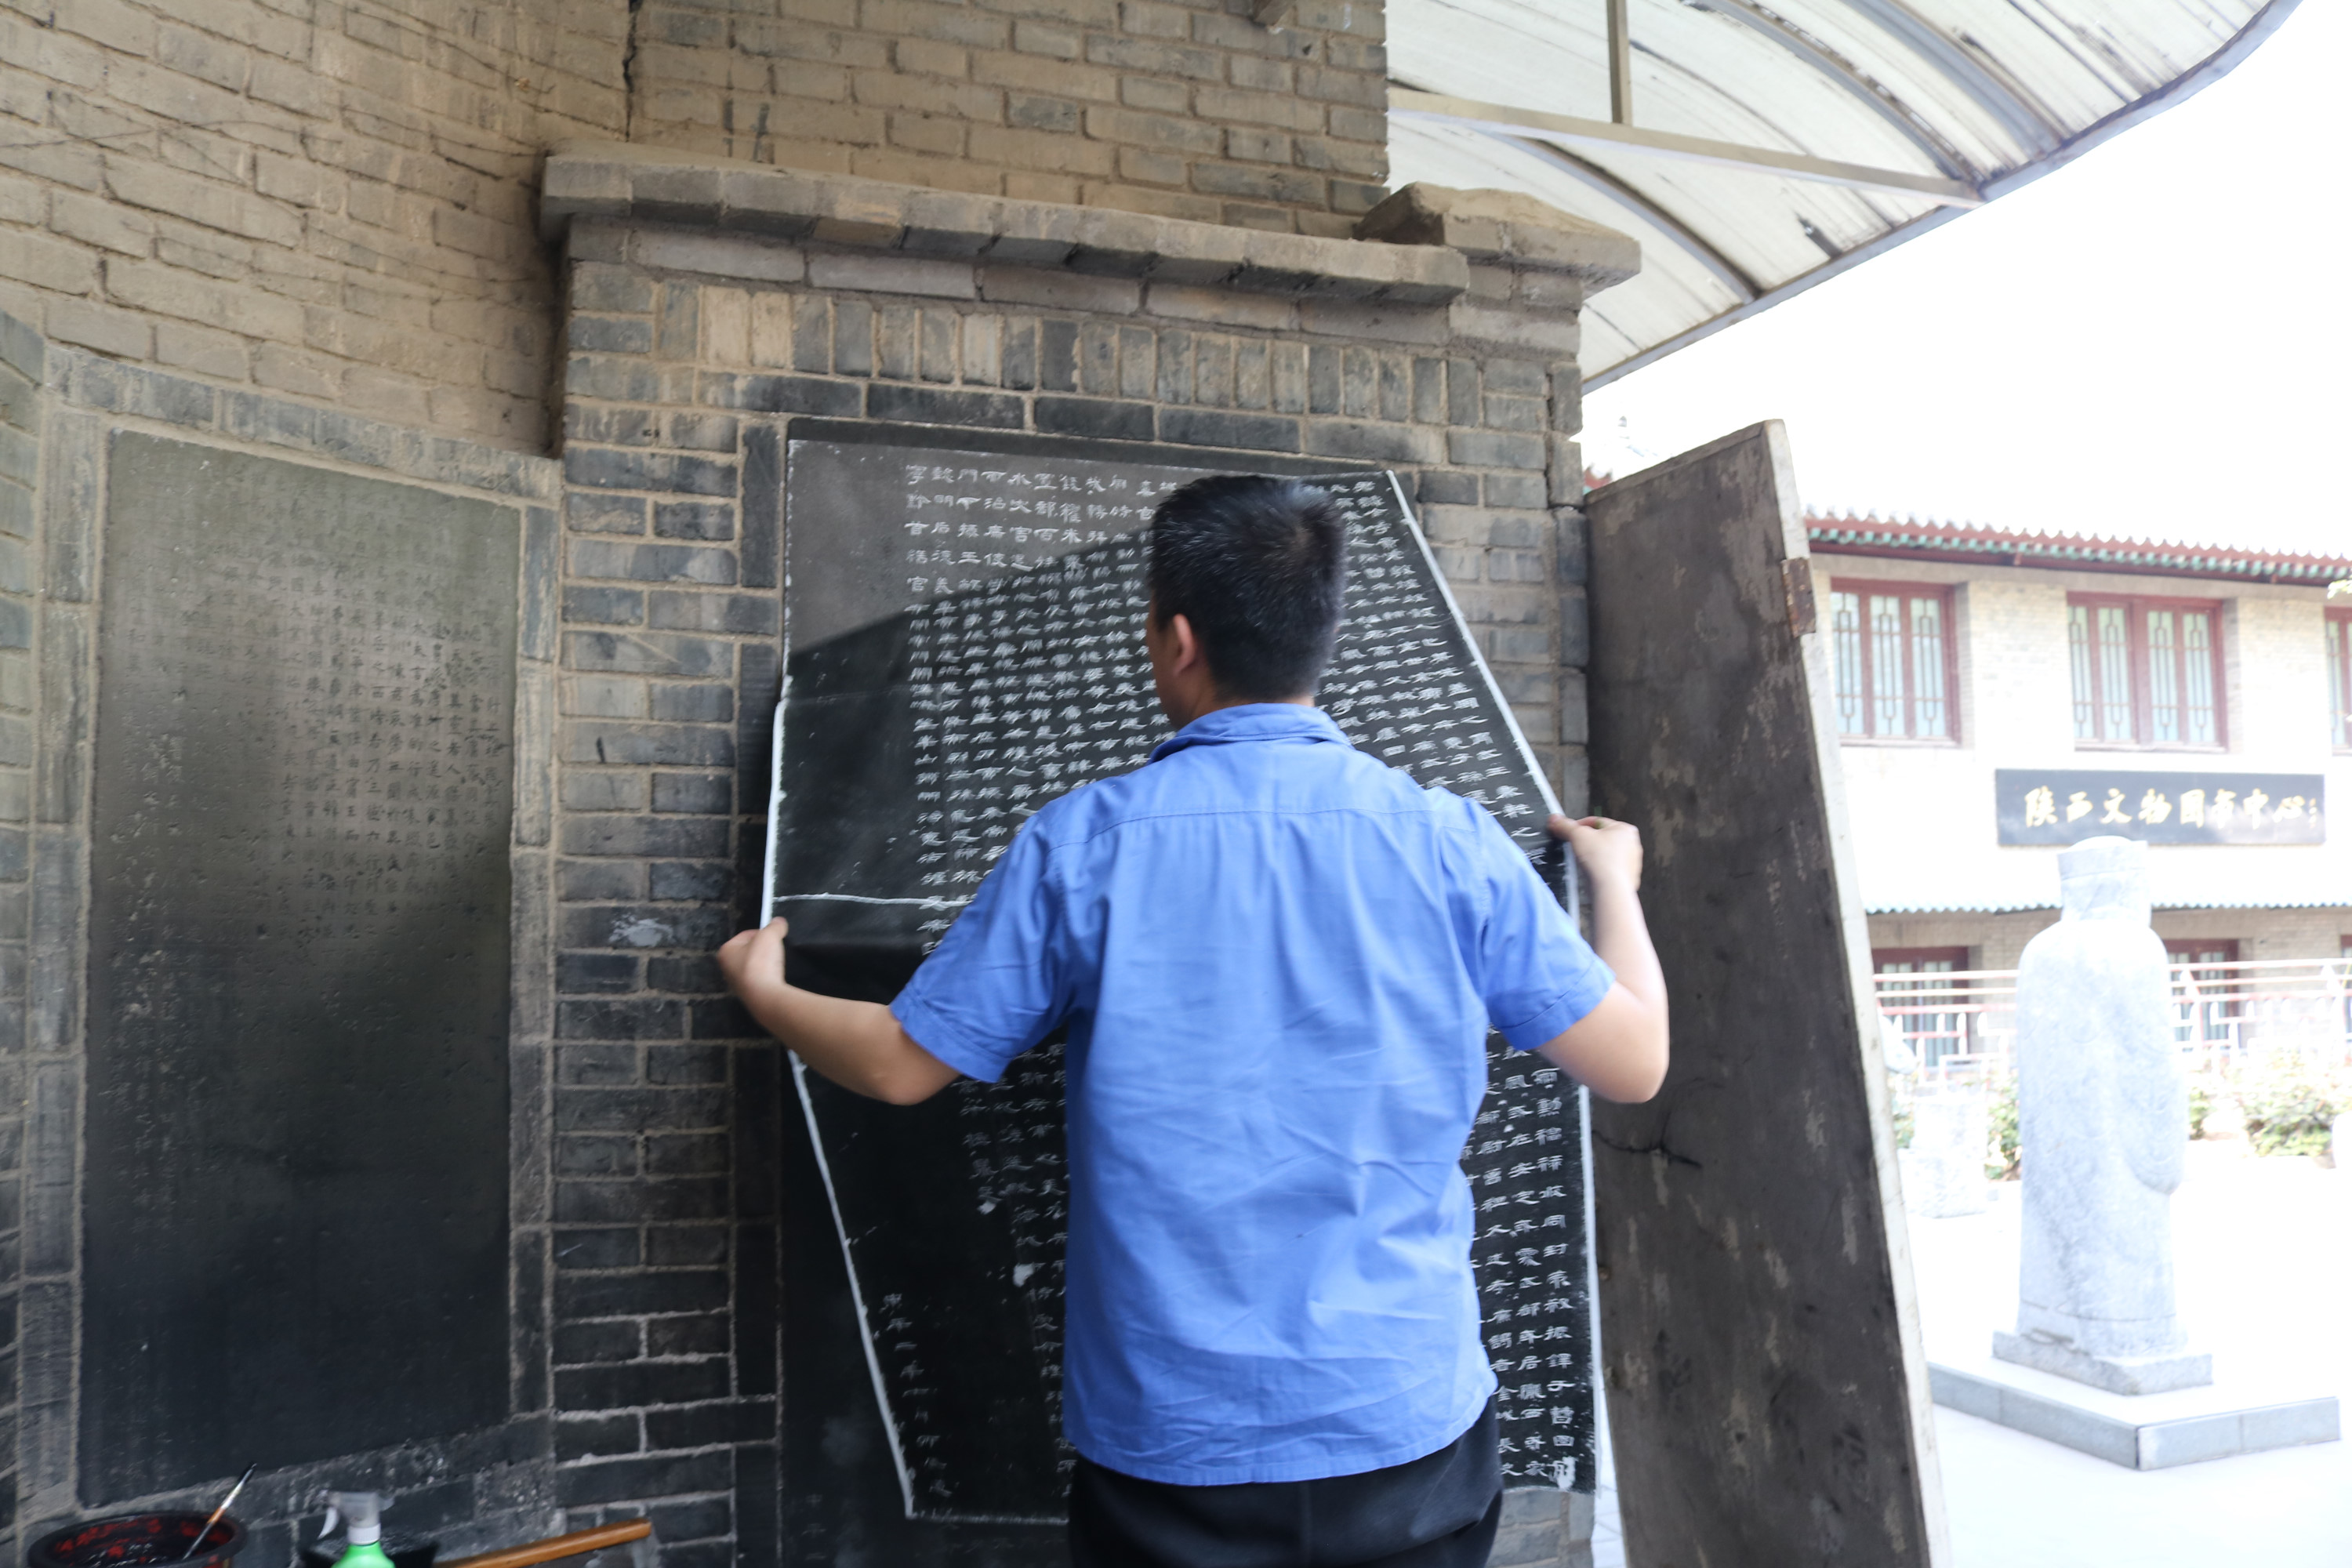 Making a stone rubbing imprint (3). The Beilin stone stelae museum in Xi'an. Photo by the author.